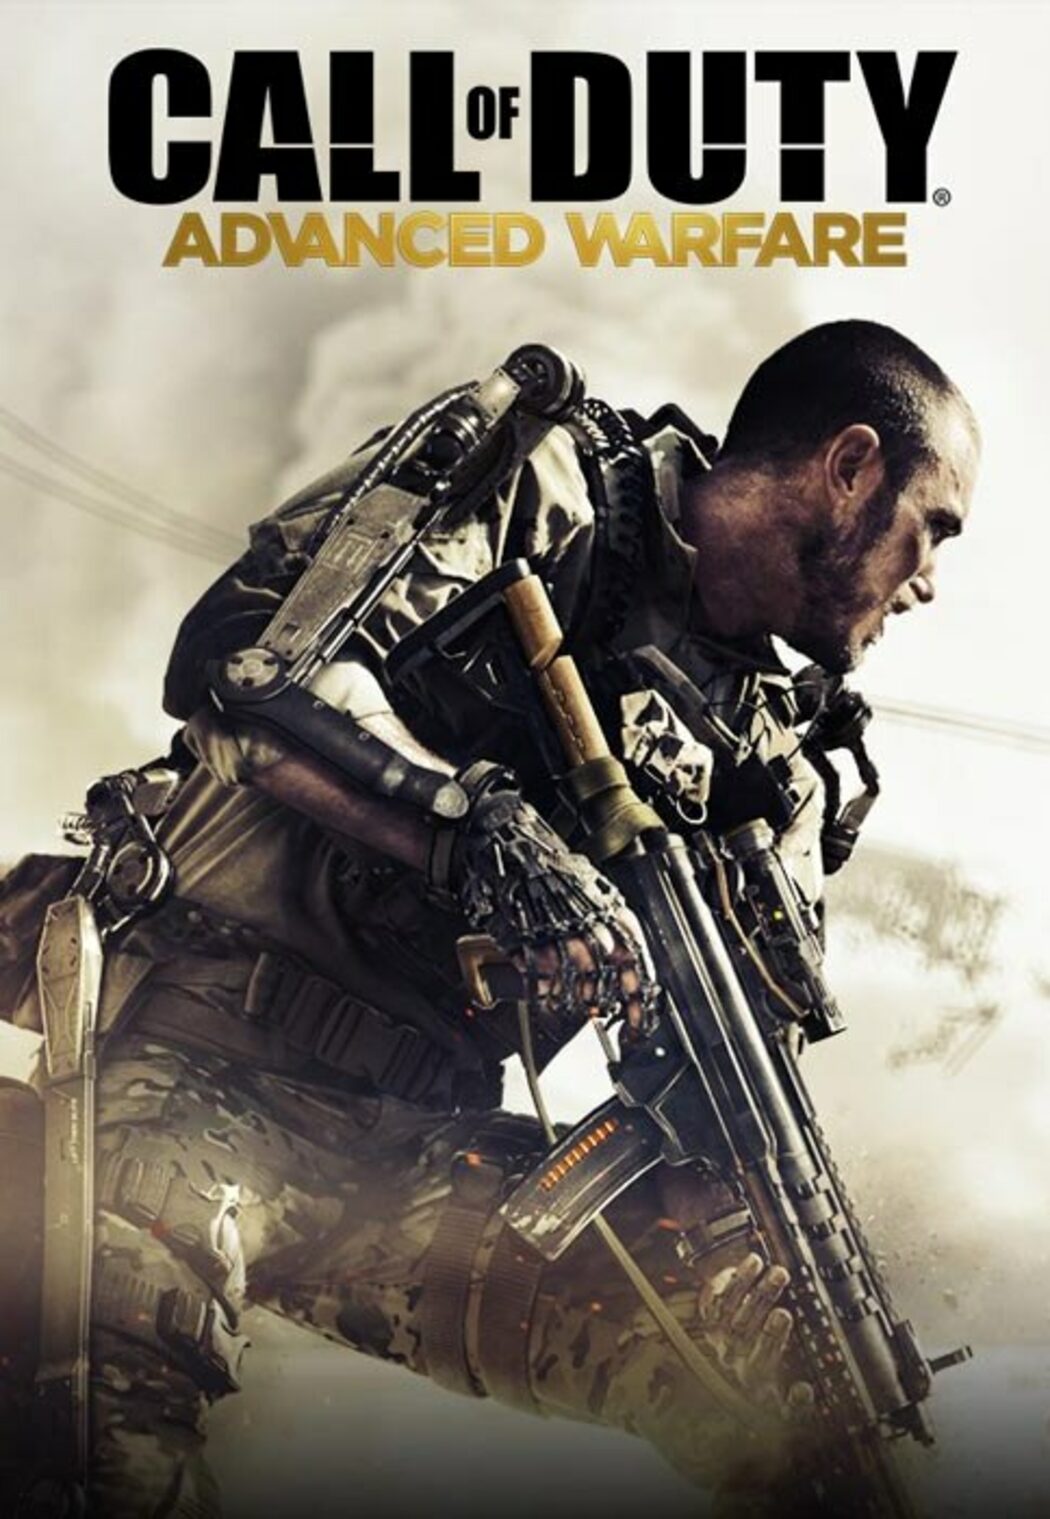 Call of Duty: Advanced Warfare (PC) CD key for Steam - price from $10.33